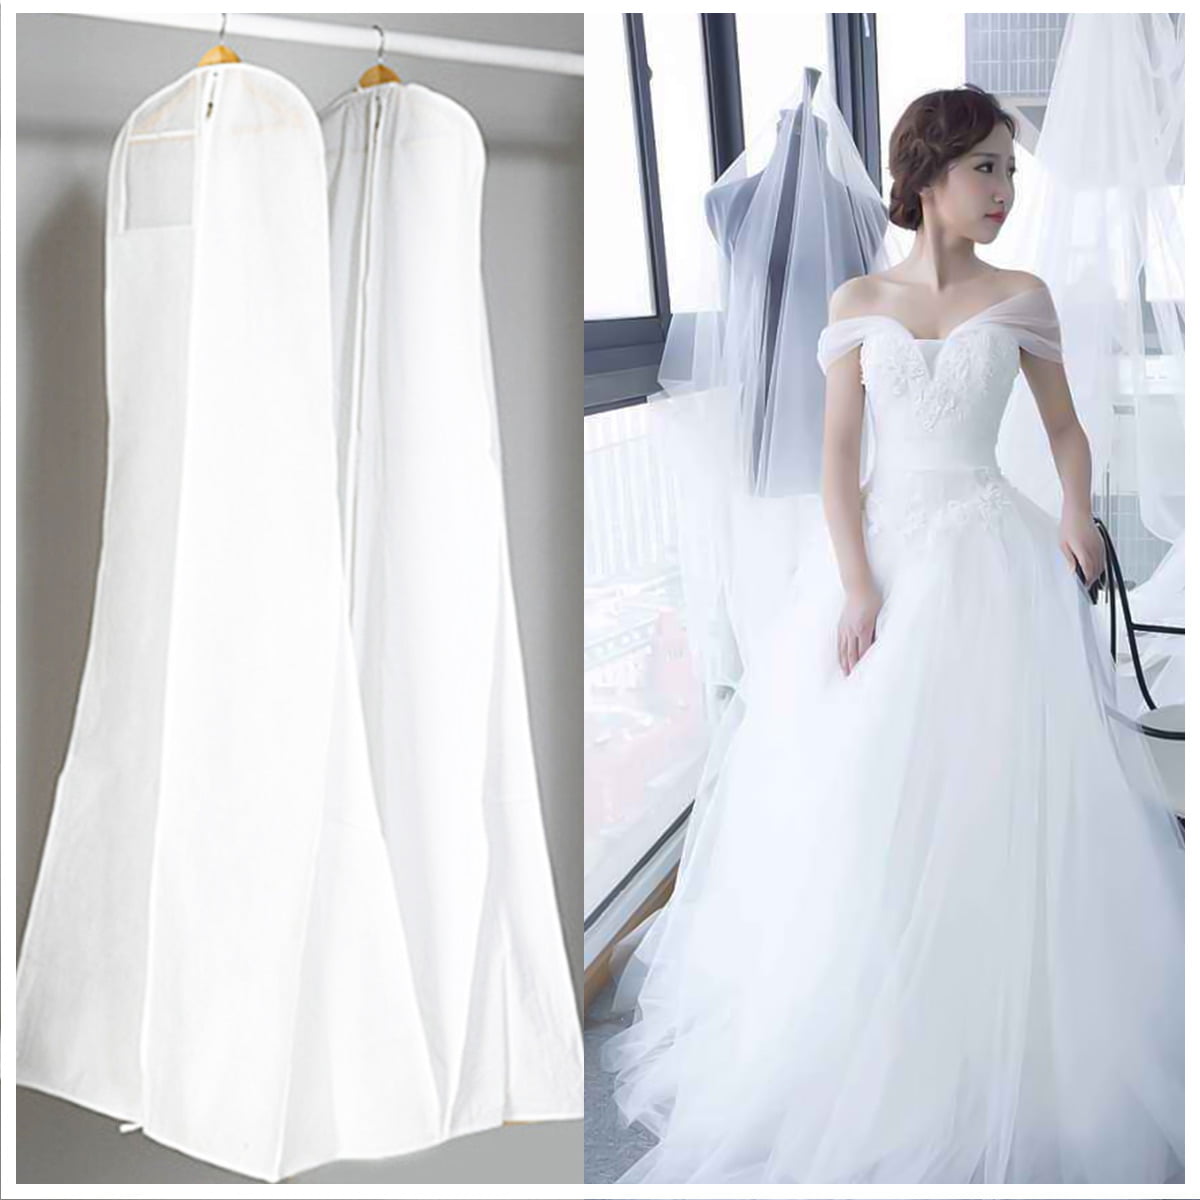 Large Wedding Dress Bridal Gown Garment Dust proof Breathable Cover Storage Bag 